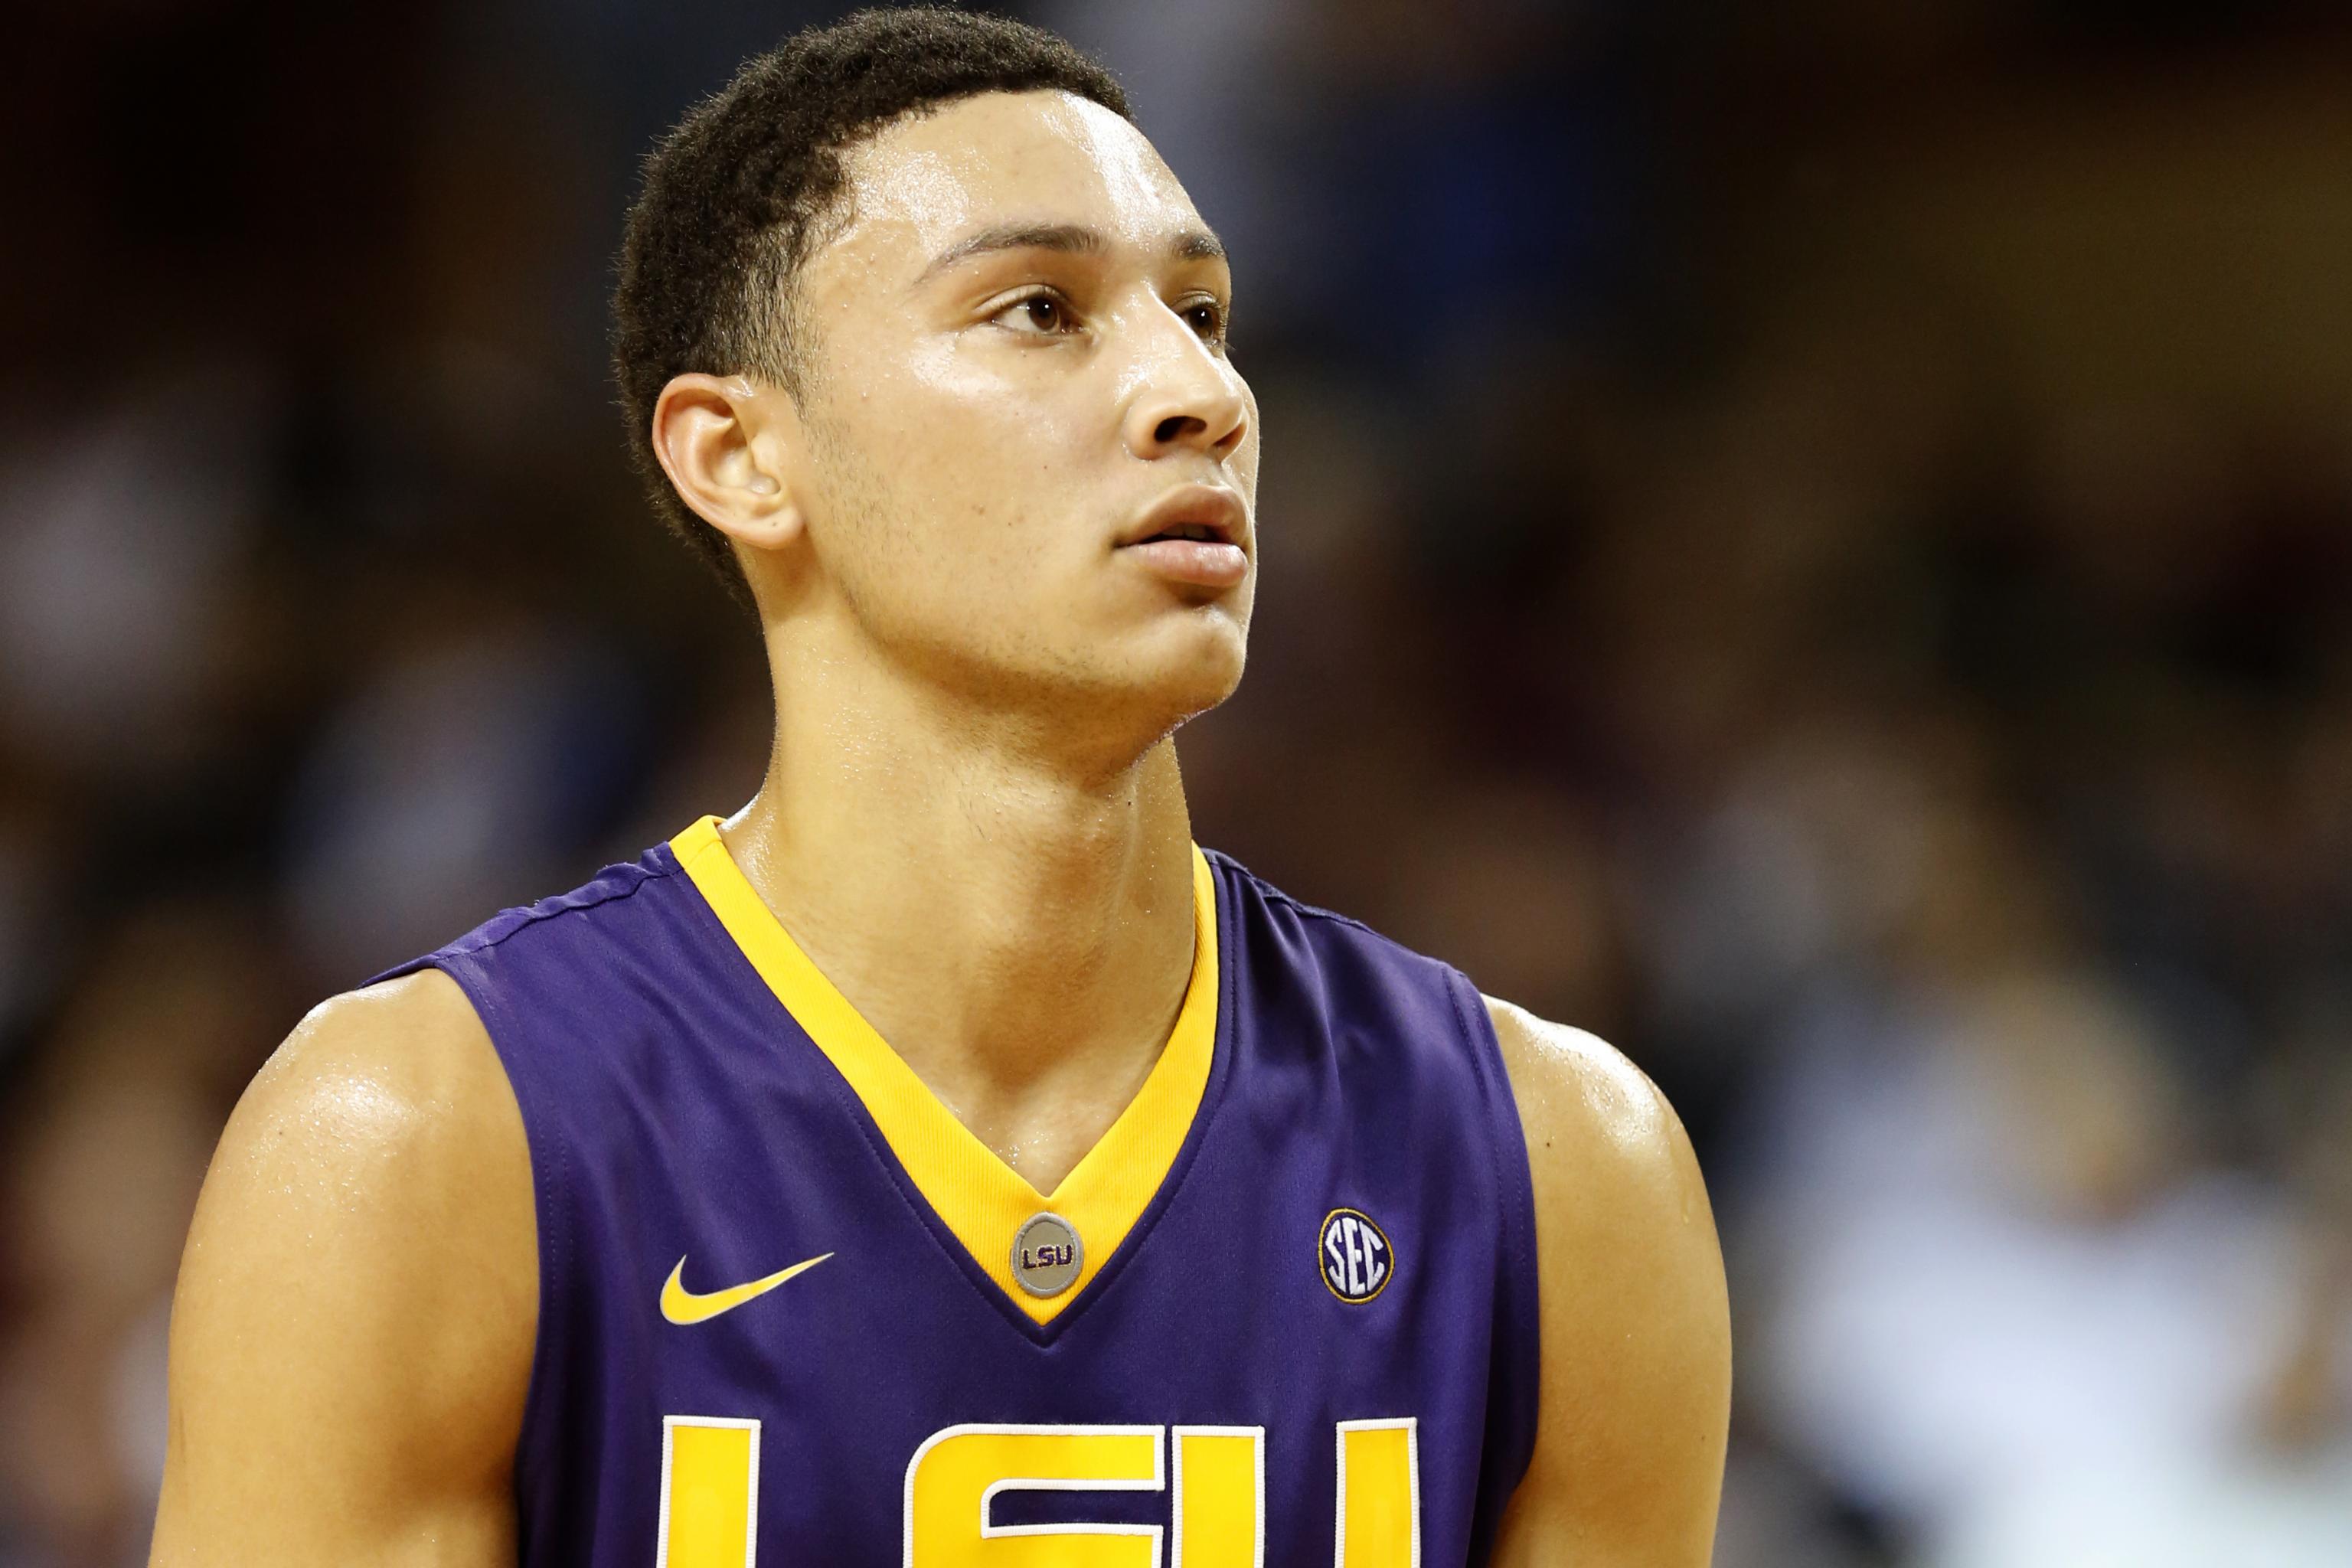 OU basketball: Comparing LSU's Ben Simmons and OU's Buddy Hield is  inevitable